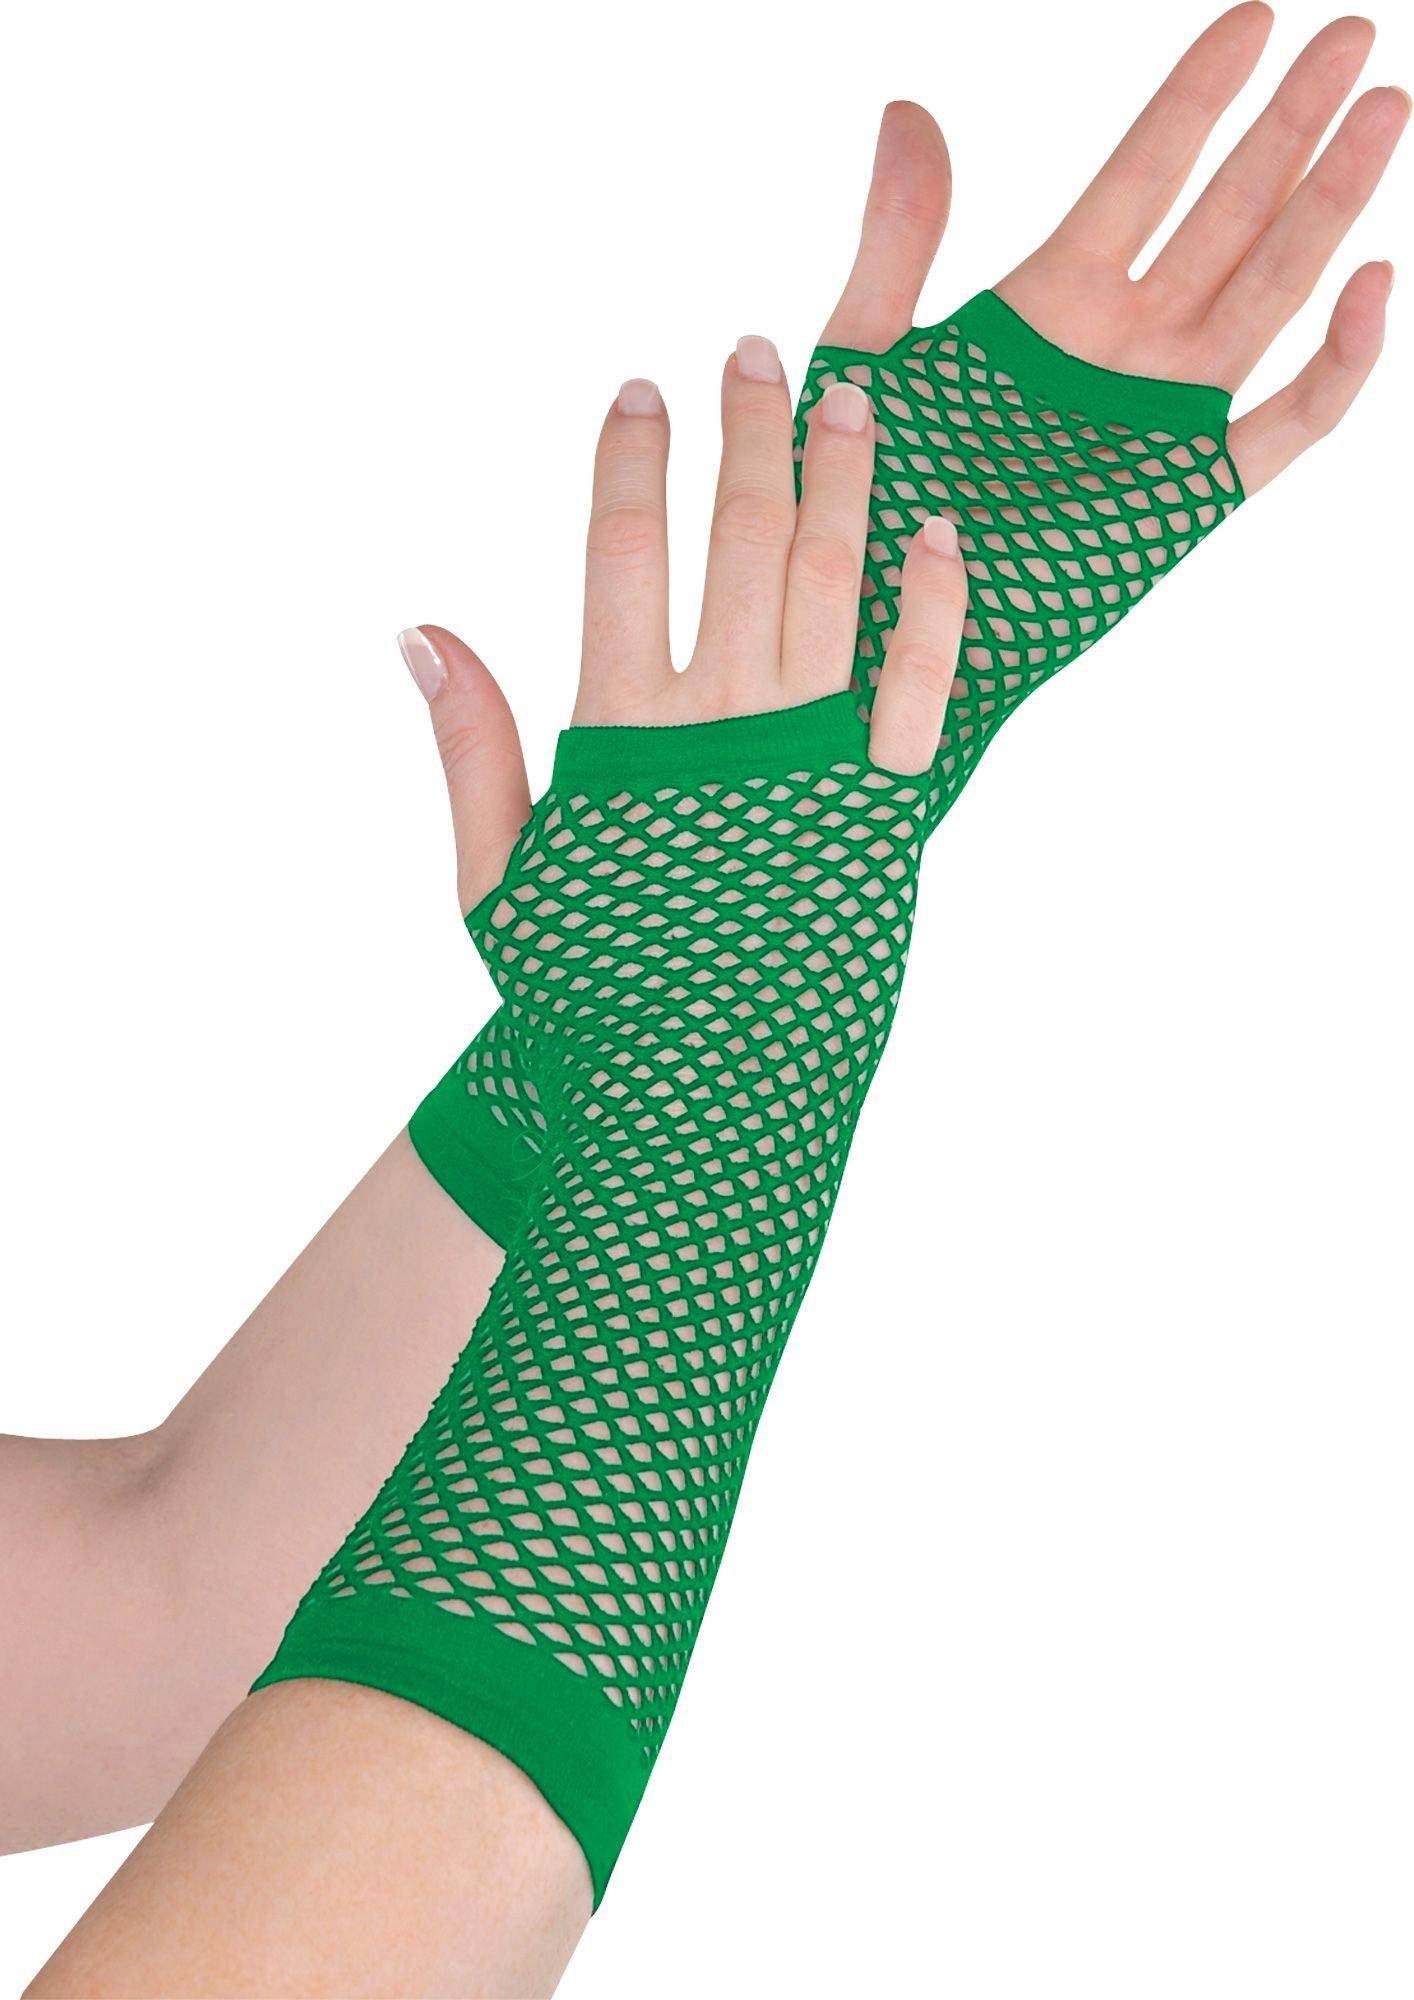 Long UV Neon Fishnet Gloves in Hot Pink and Green